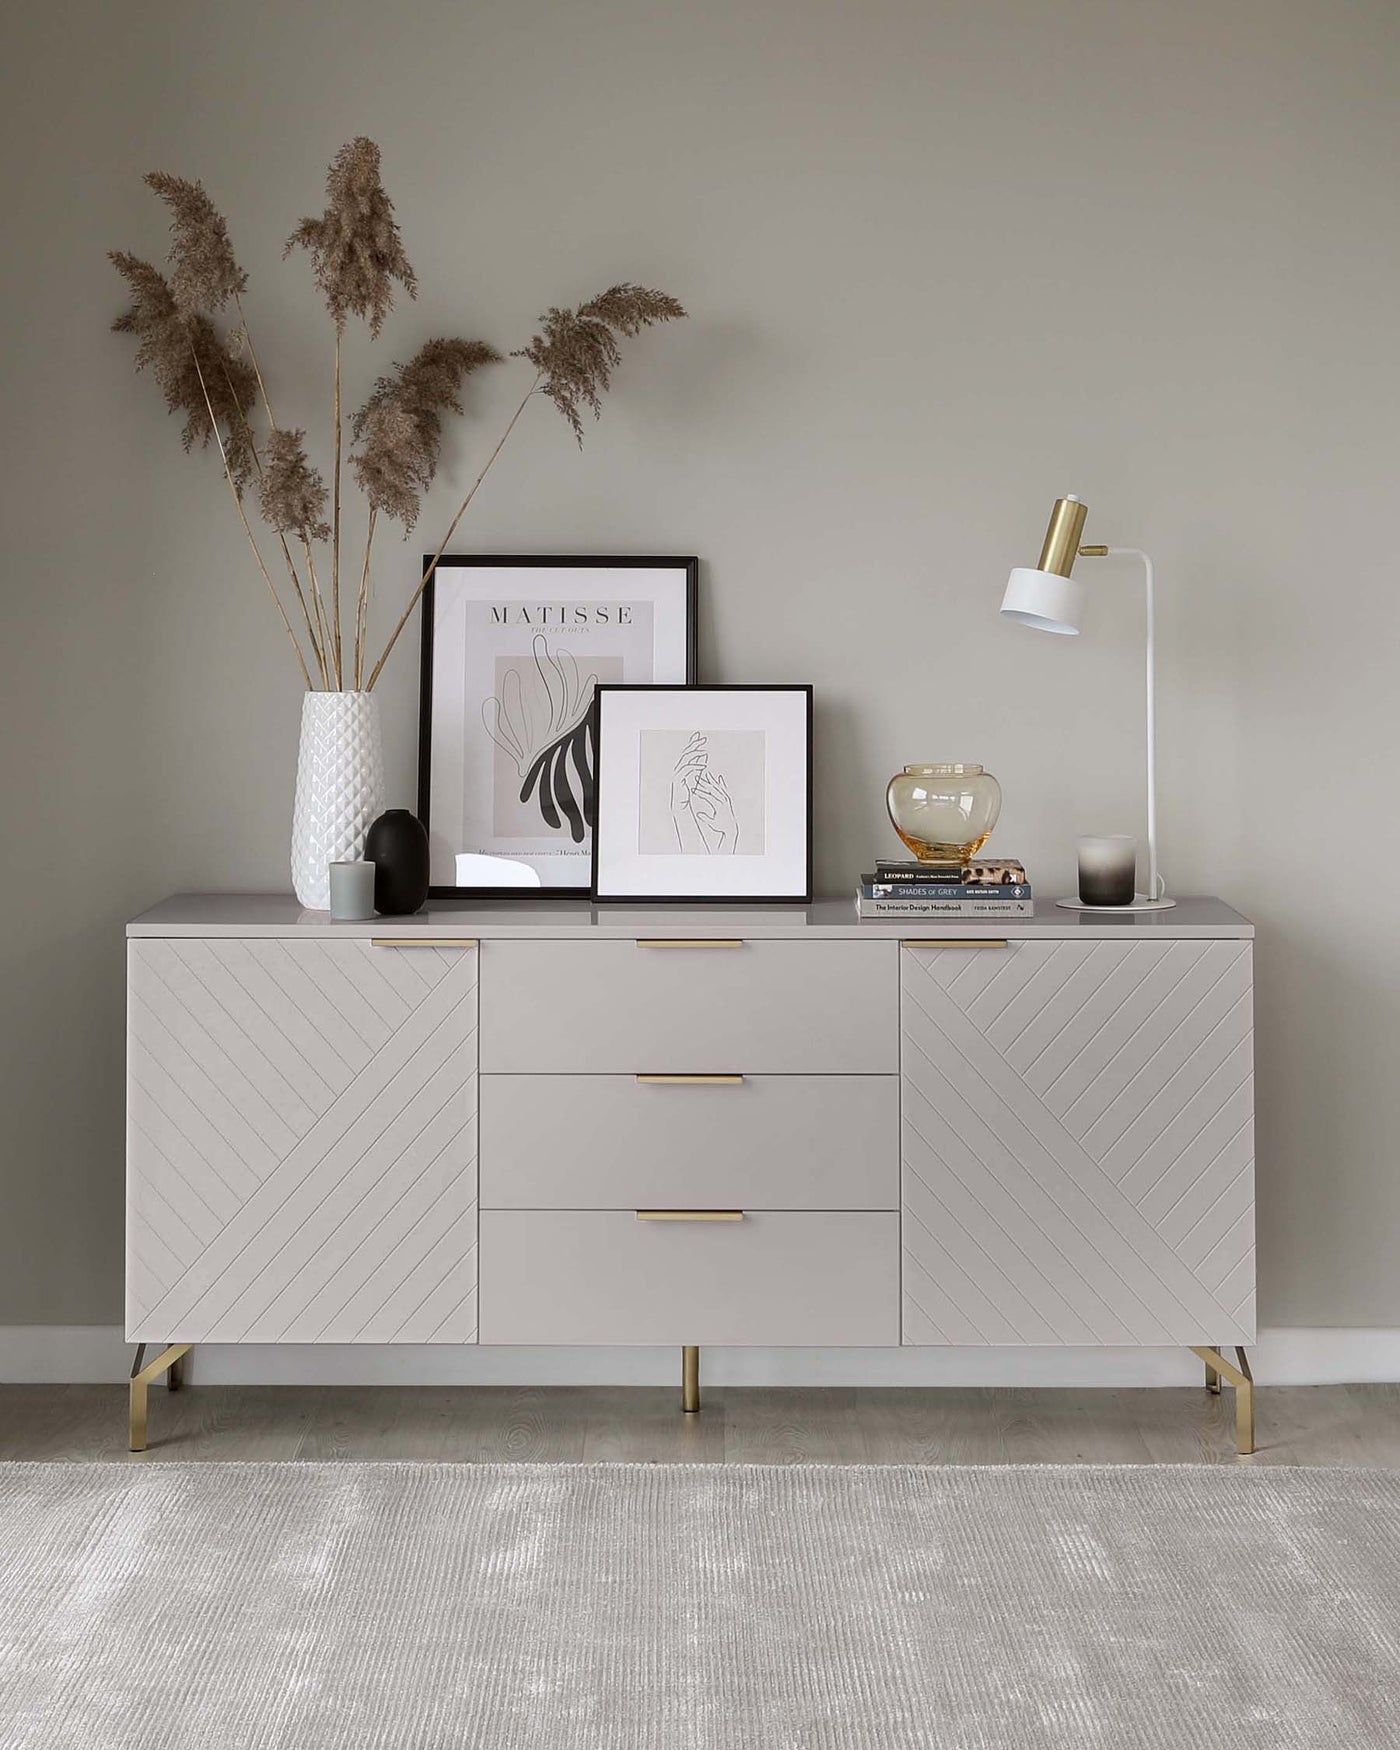 Modern light grey sideboard with chevron patterned front, brass handles, and legs.